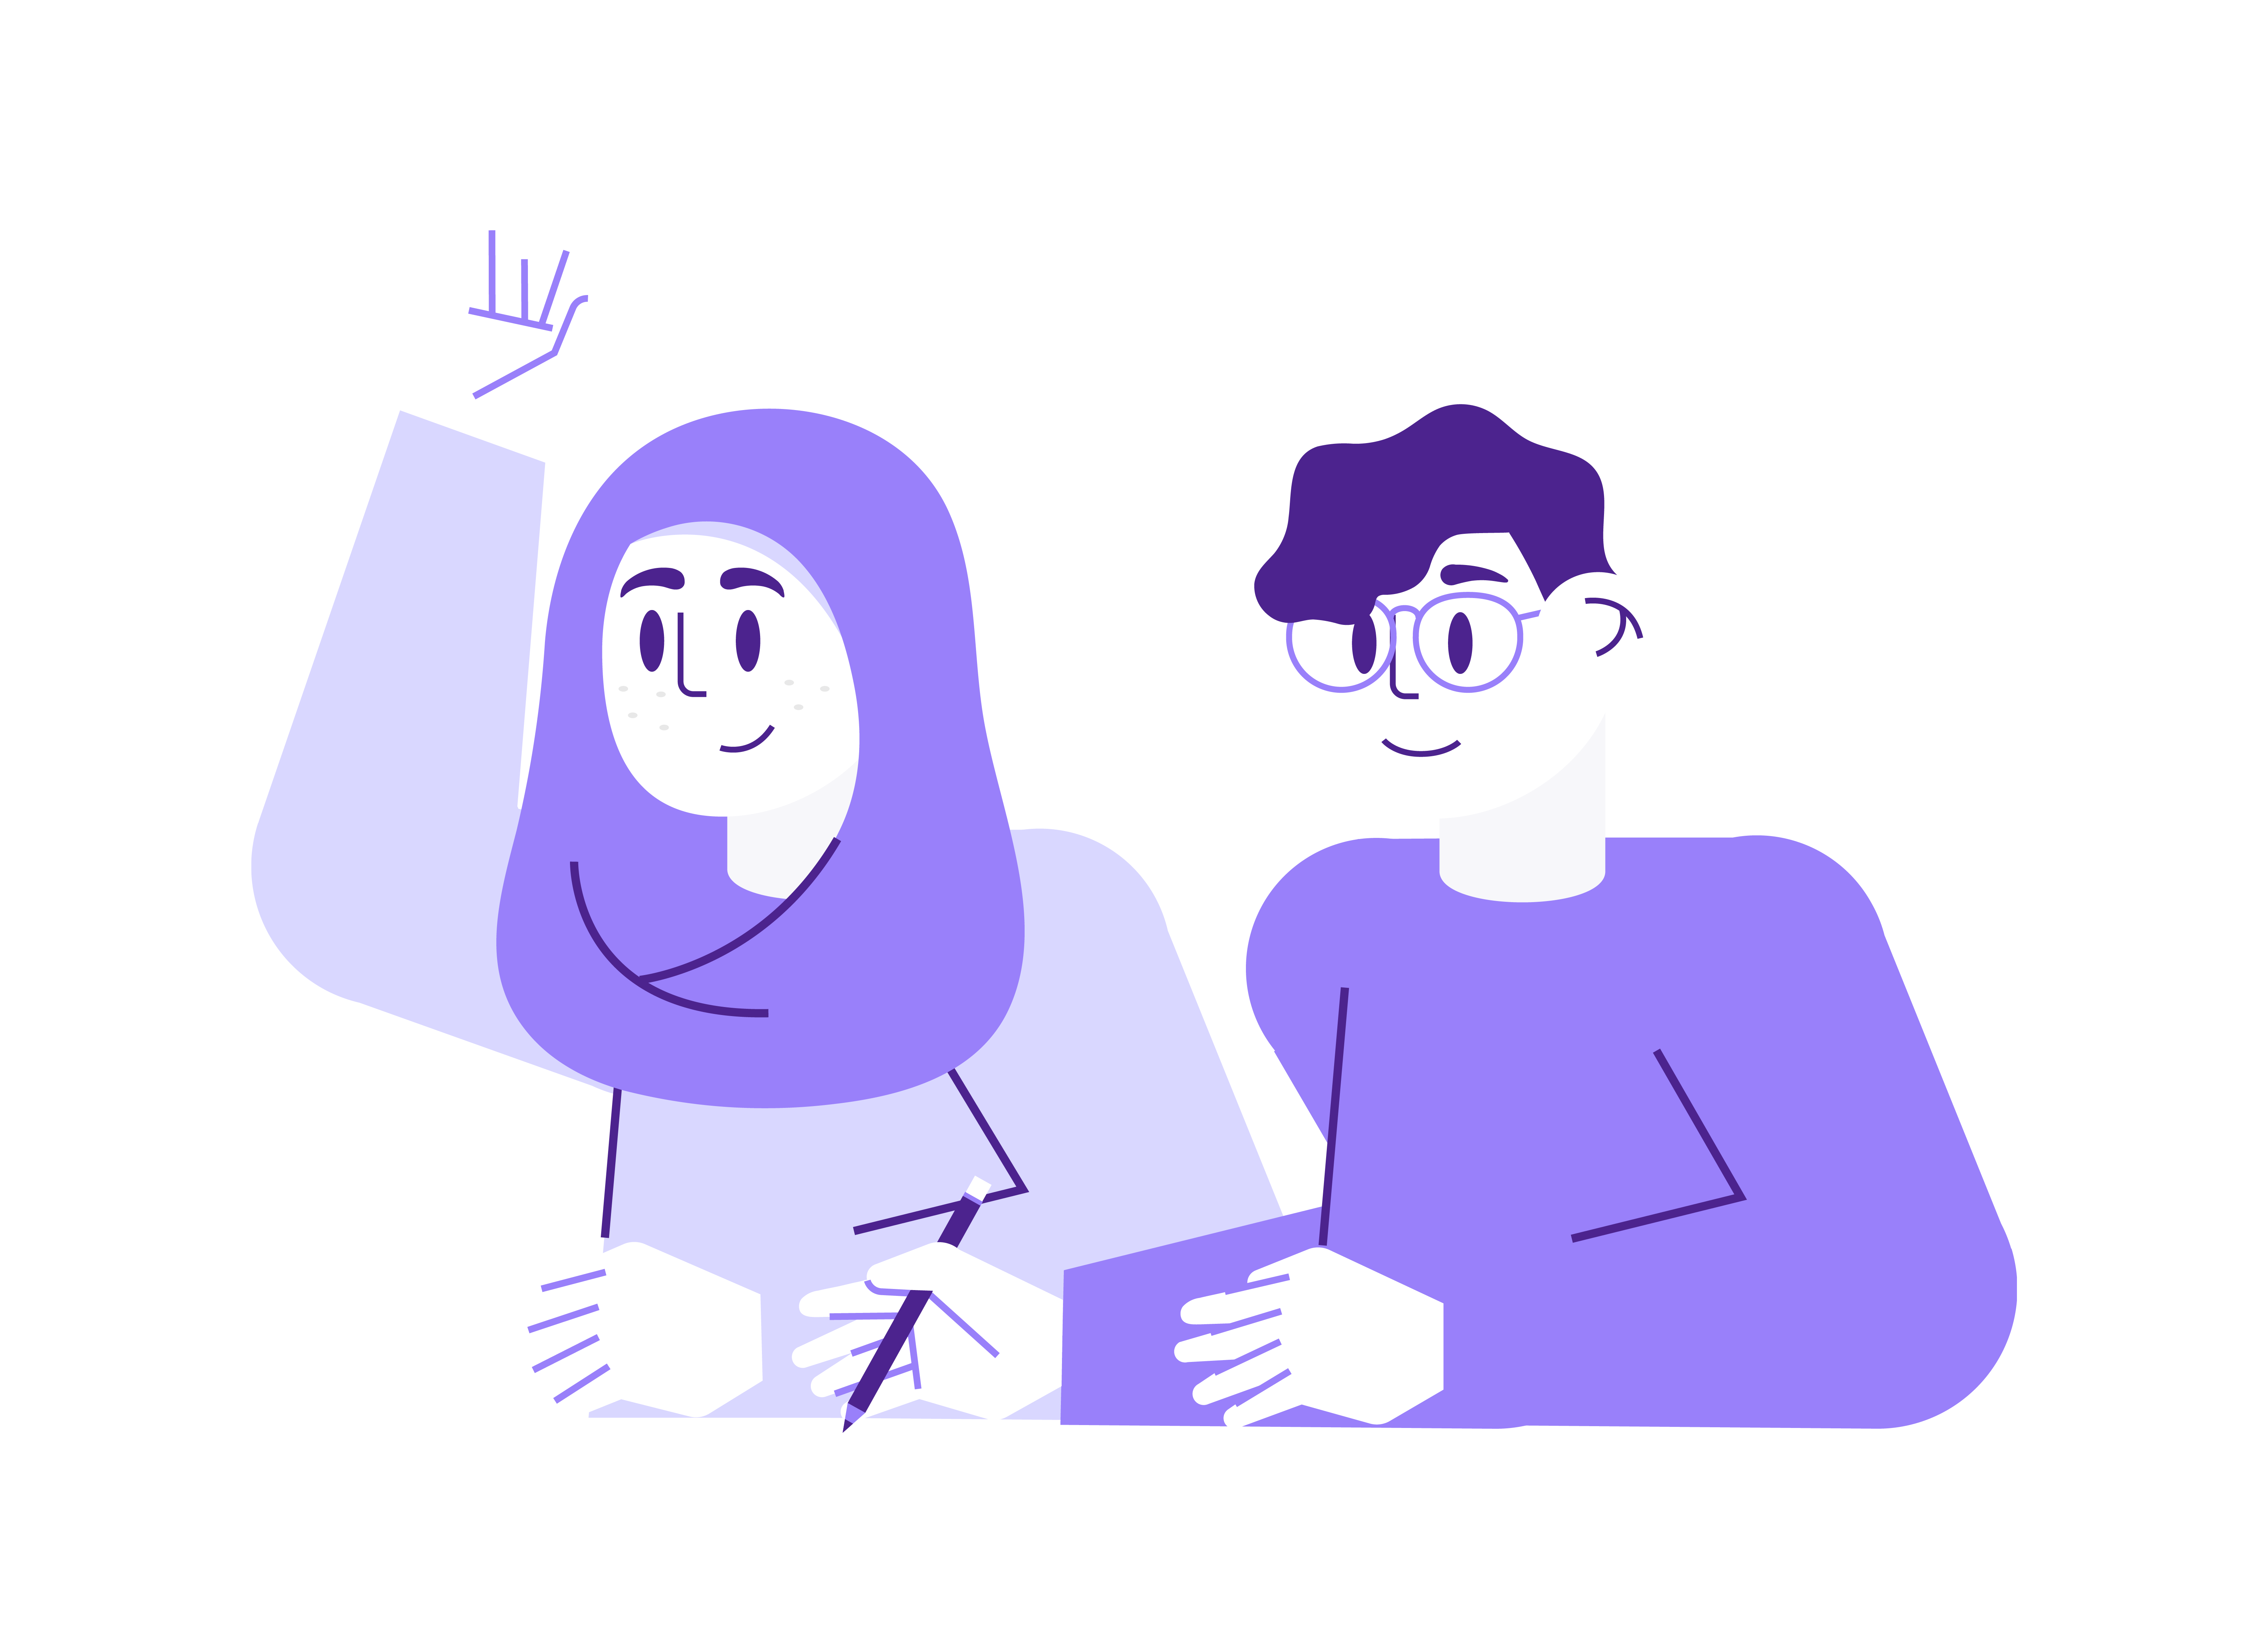 Student with raised hand. Student with pencil in hand. Both with purple color.